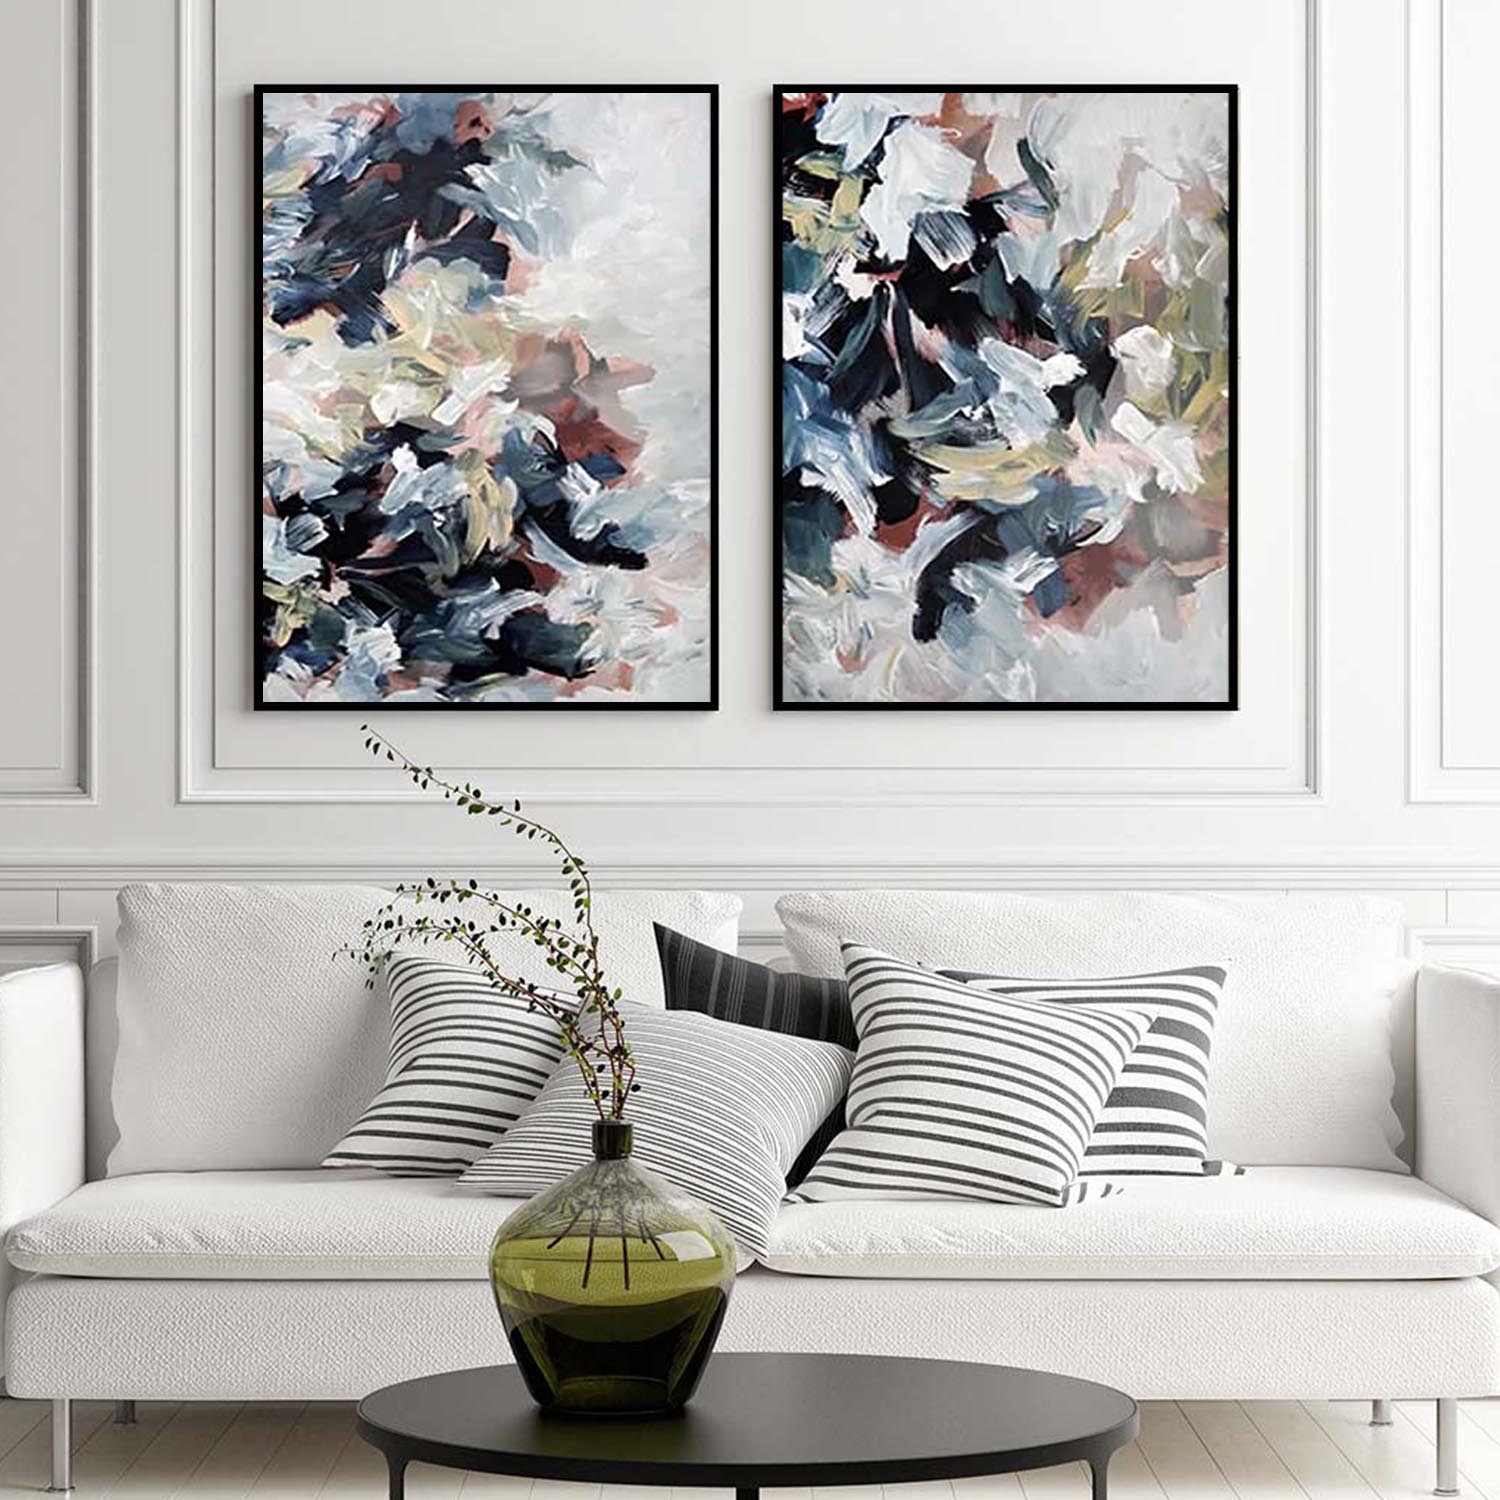 Sale - Art on sale - Affordable Art By Abstract House